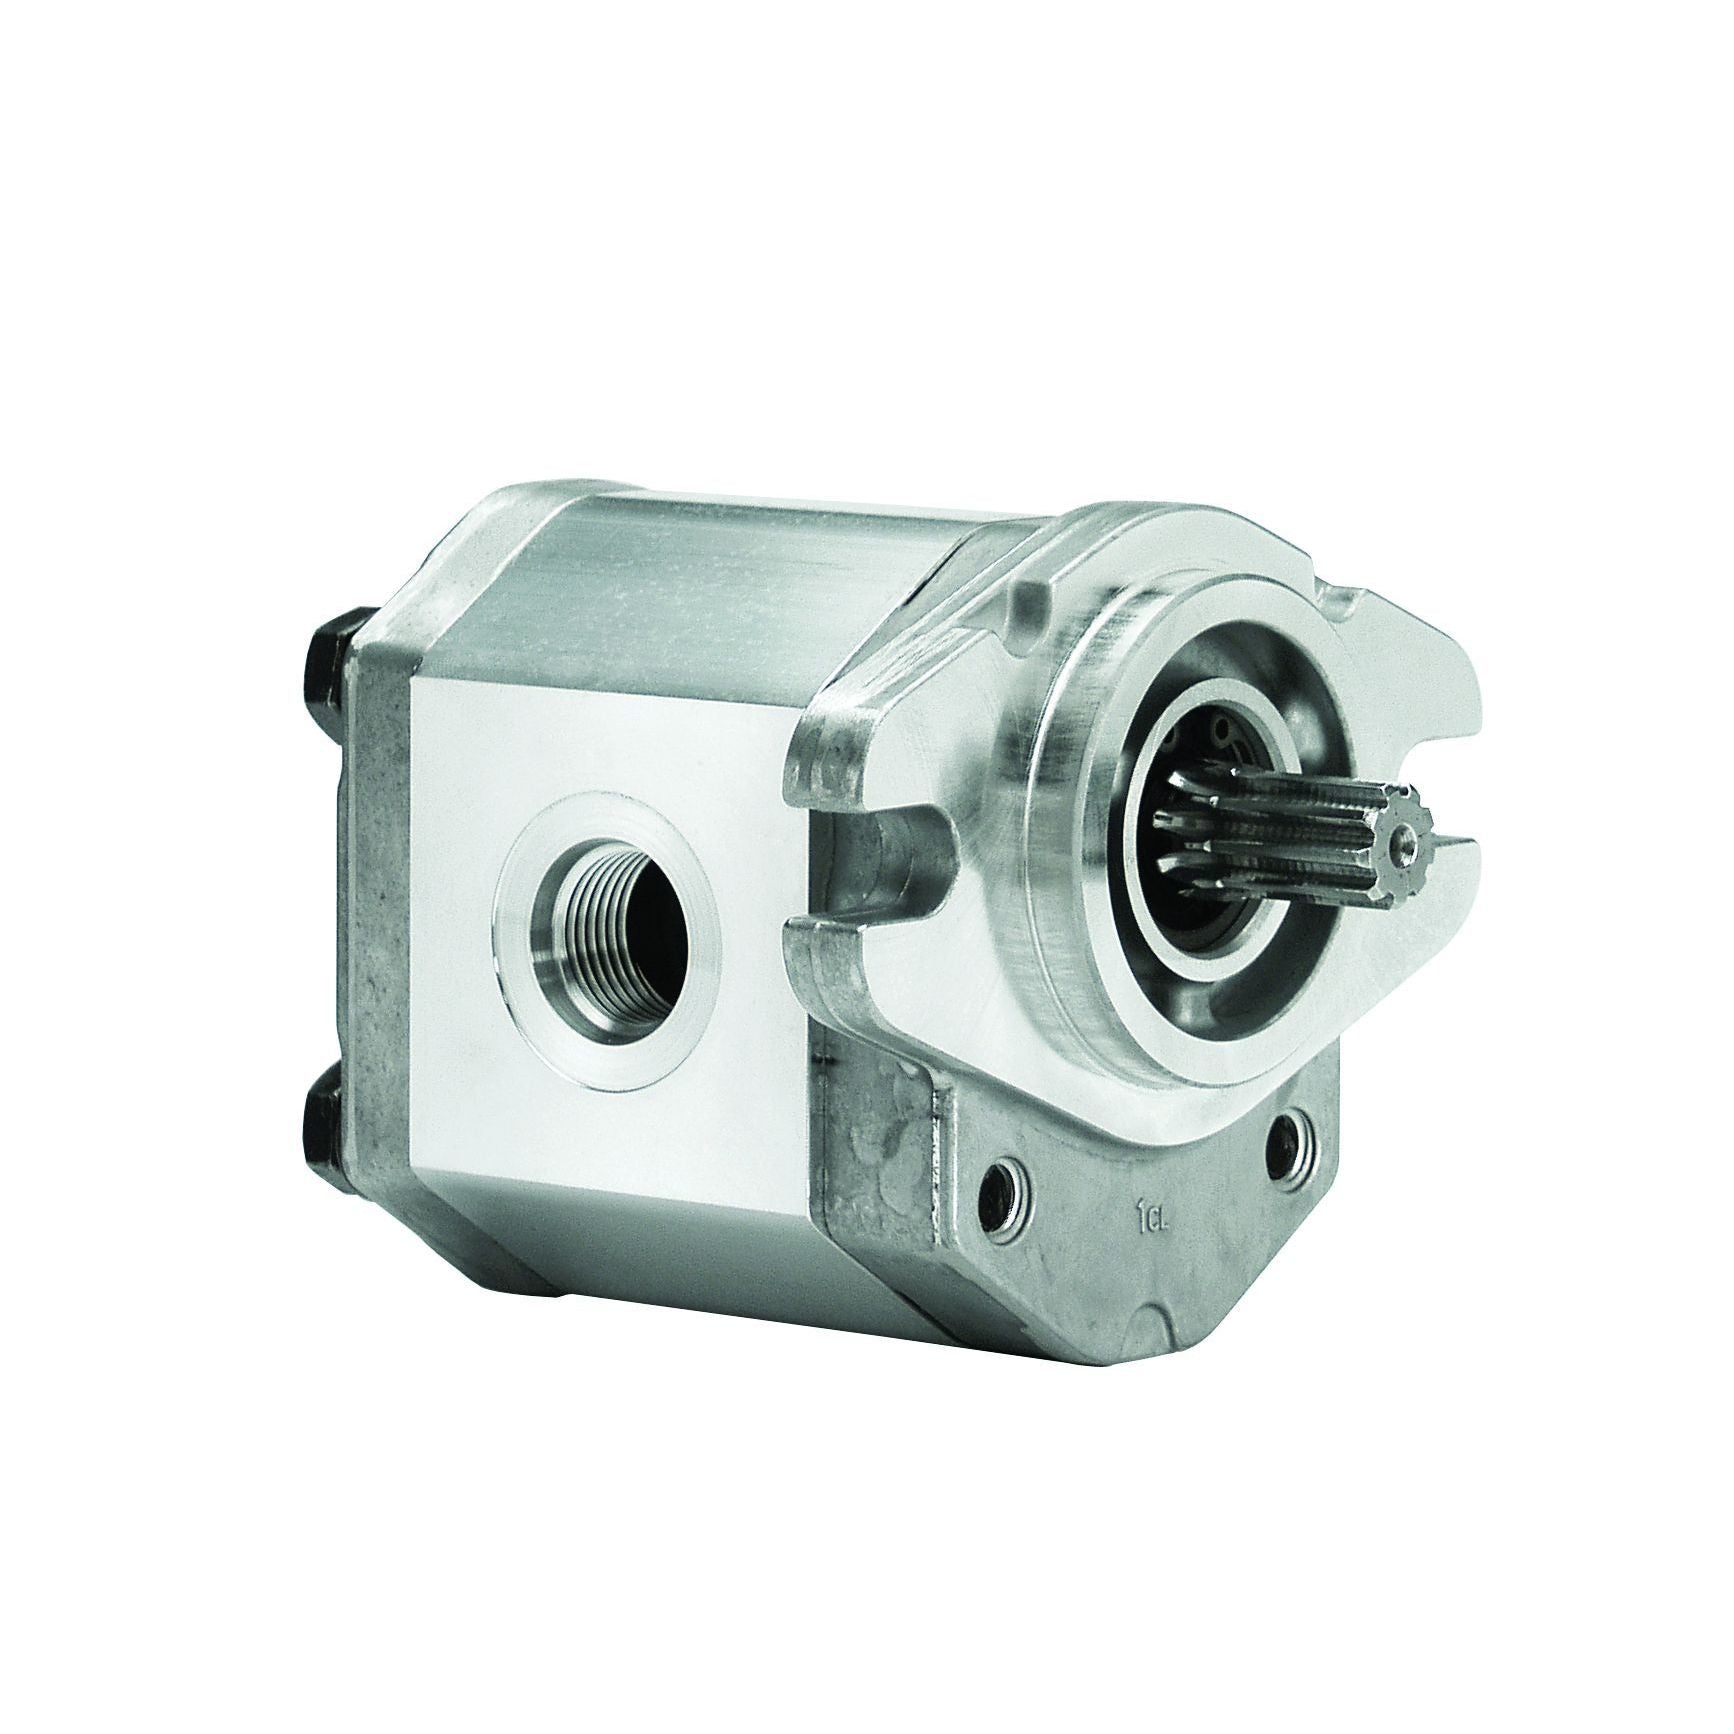 ALP2A-D-30-S1 : Marzocchi Gear Pump, CW, 21.1cc (1.2871in3), 10.03 GPM, 2610psi, 2200 RPM, #12 SAE (3/4") In, #10 SAE (5/8") Out, Splined Shaft 9T 16/32DP, SAE A 2-Bolt Mount